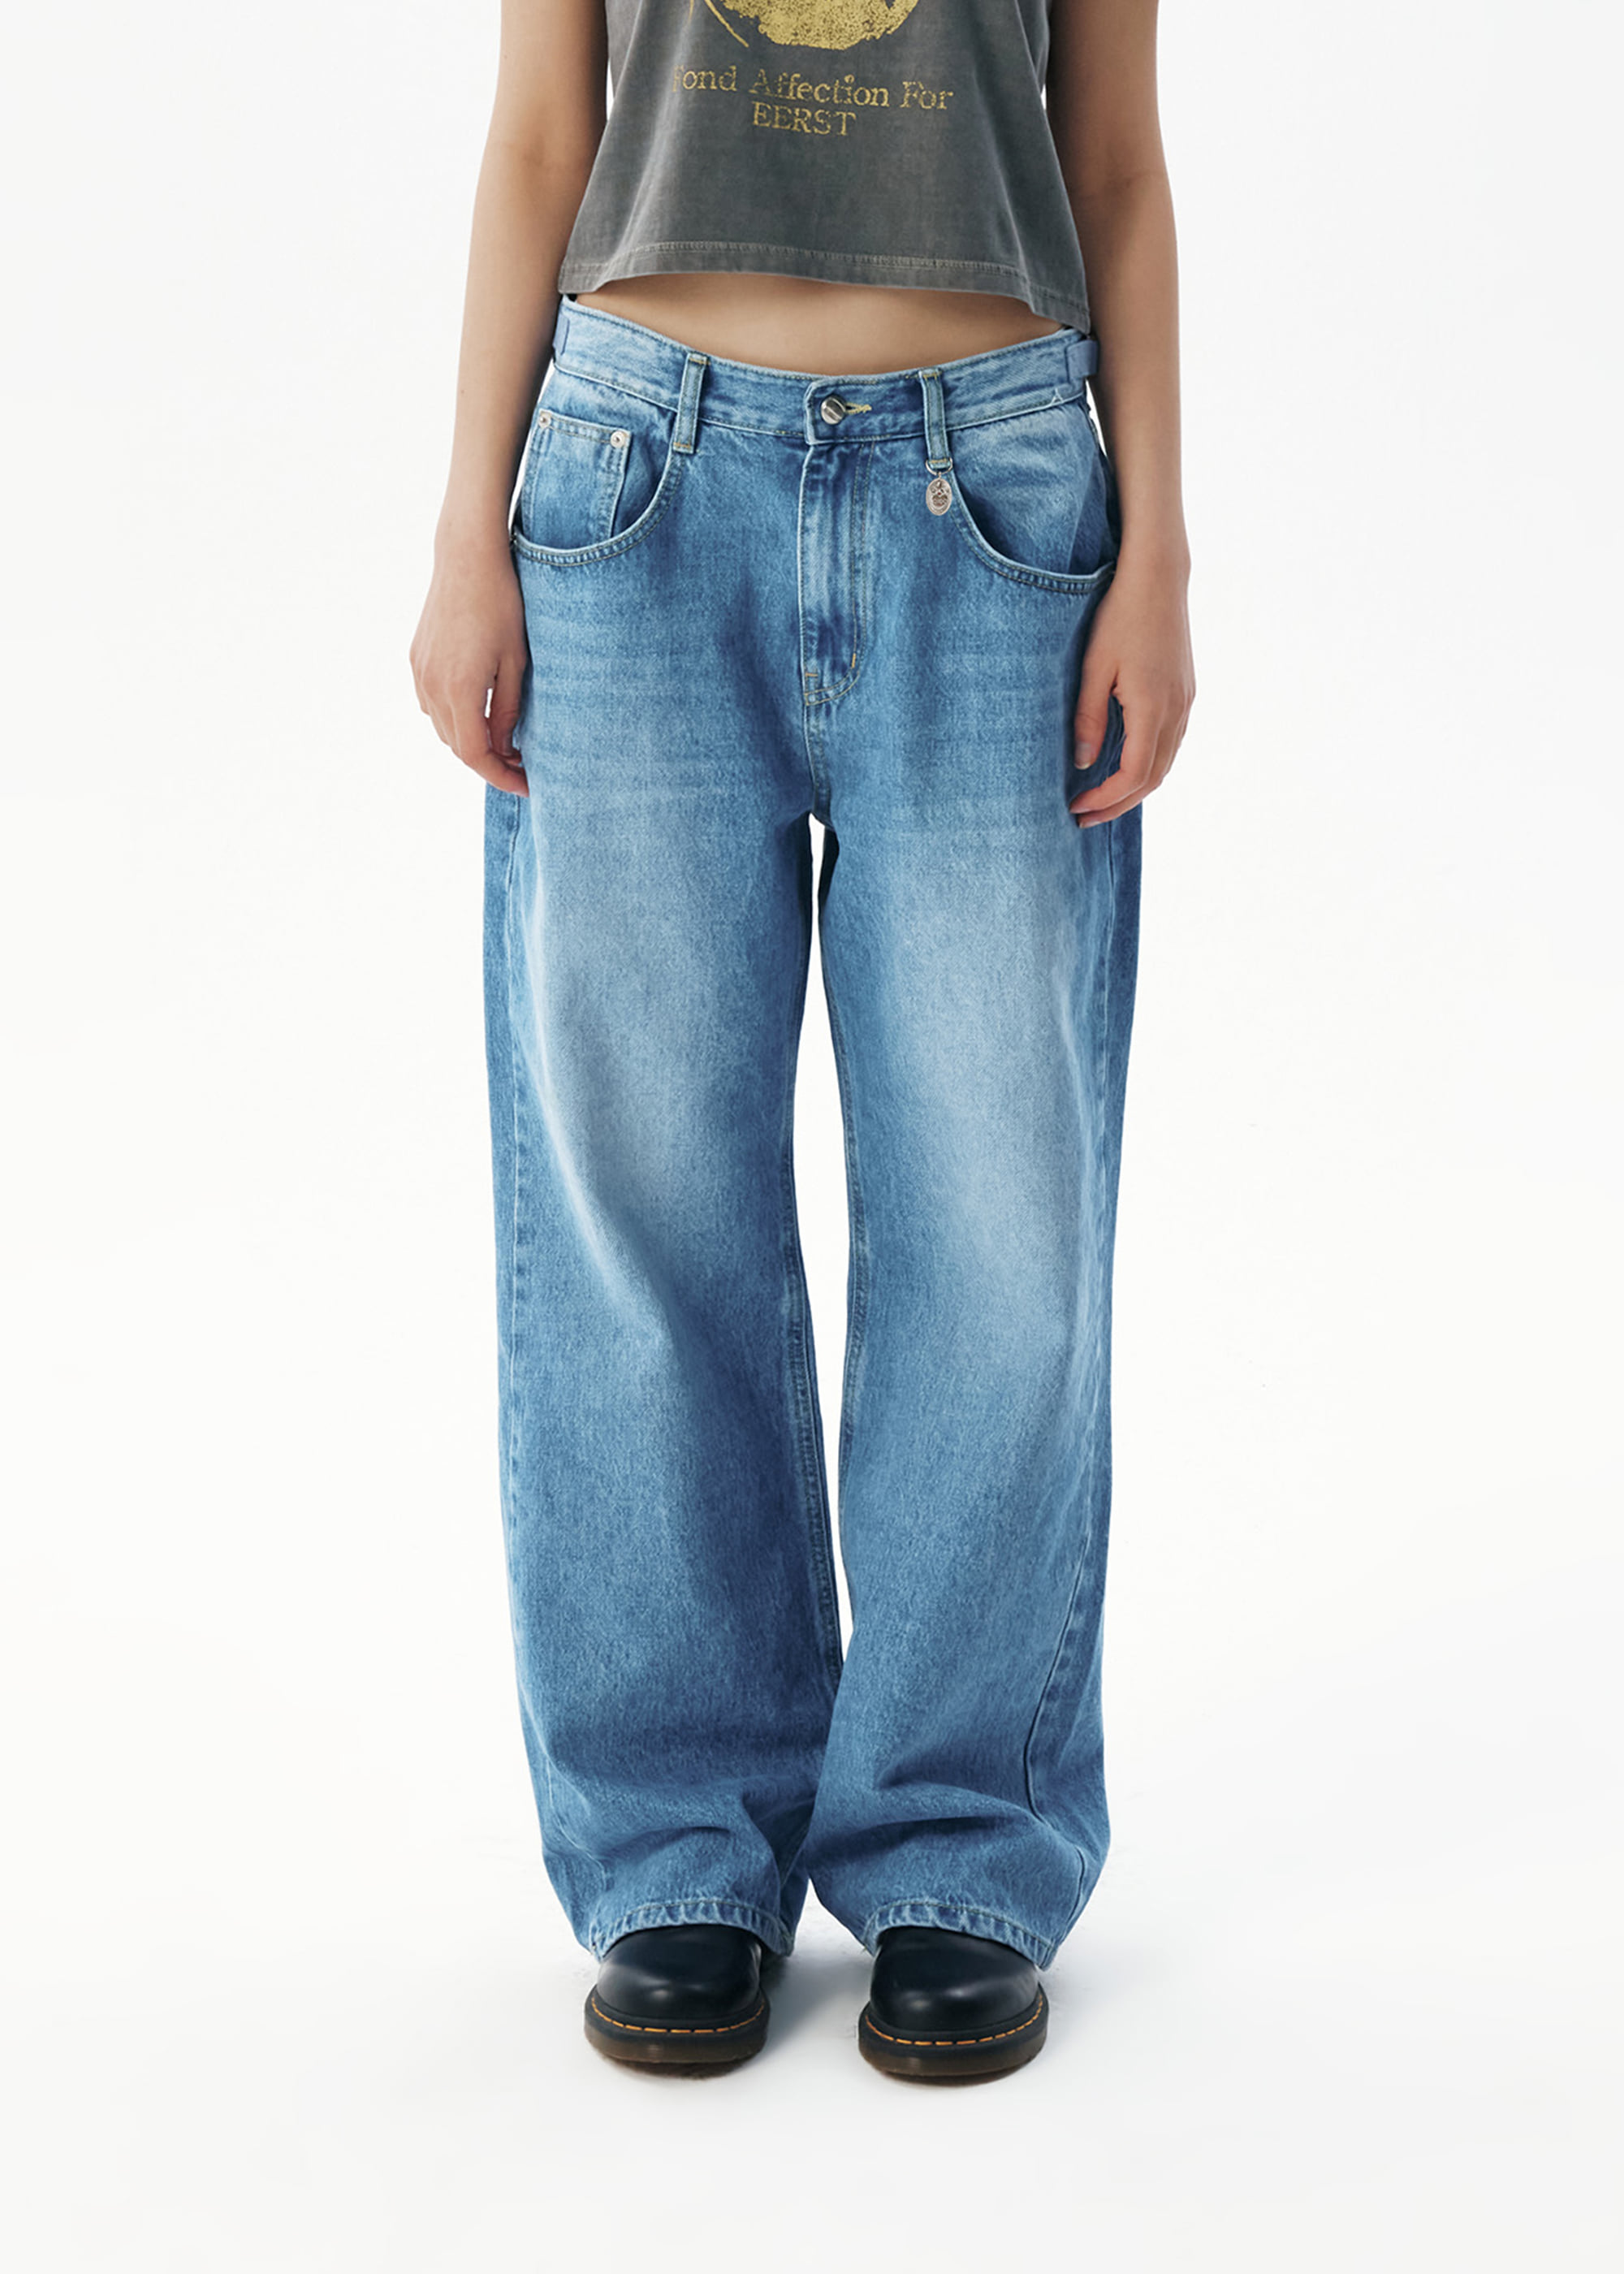 W-Astral Jeans [Blue]